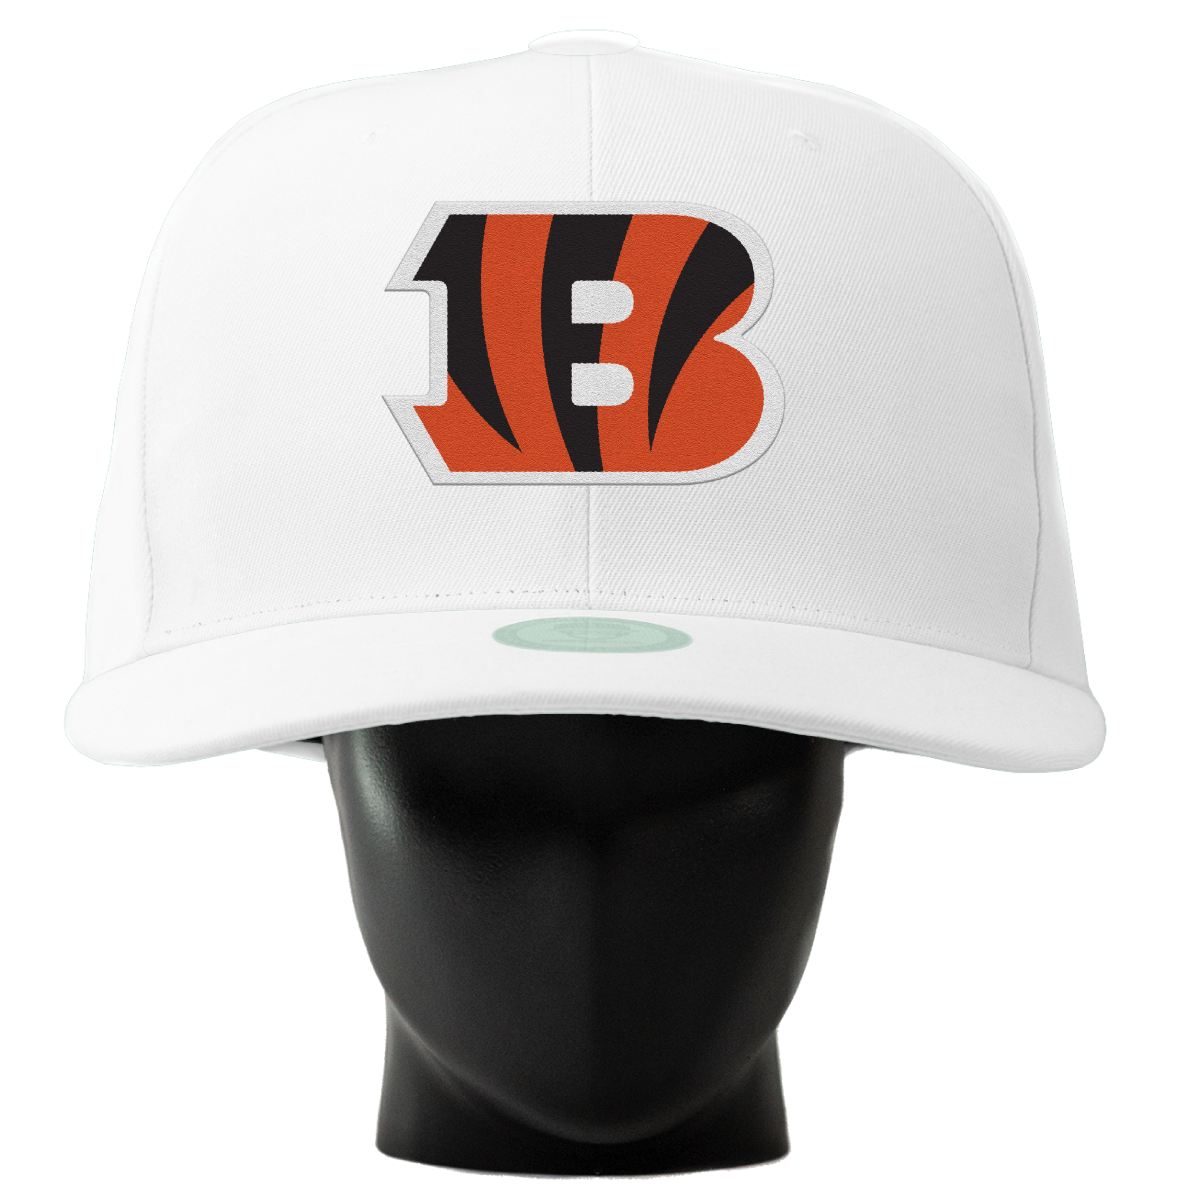 bengals hat fitted